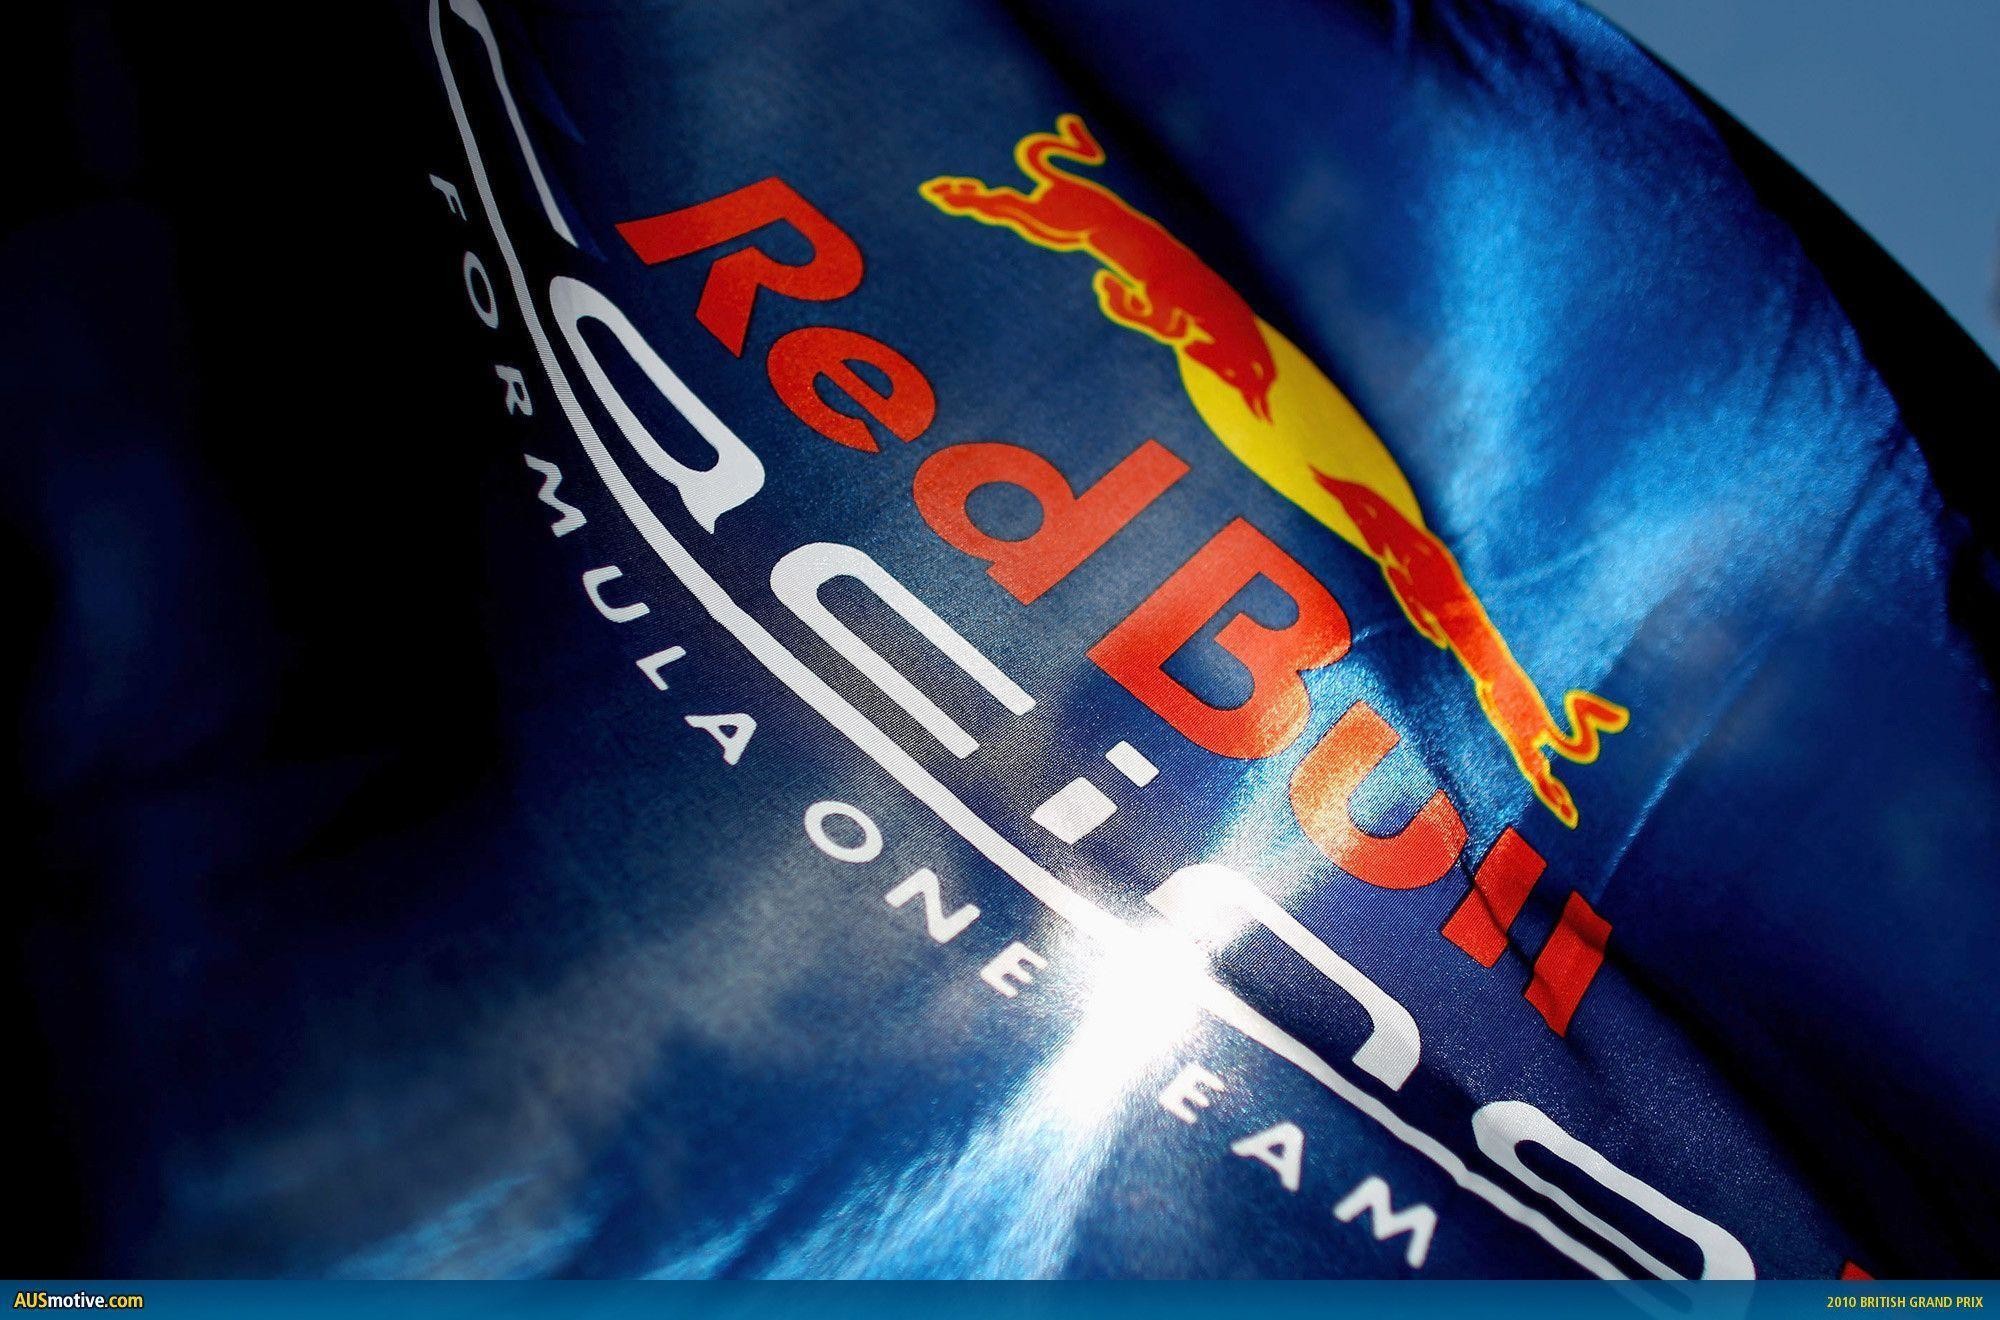 Red Bull Racing Wallpaper 71 Pictures